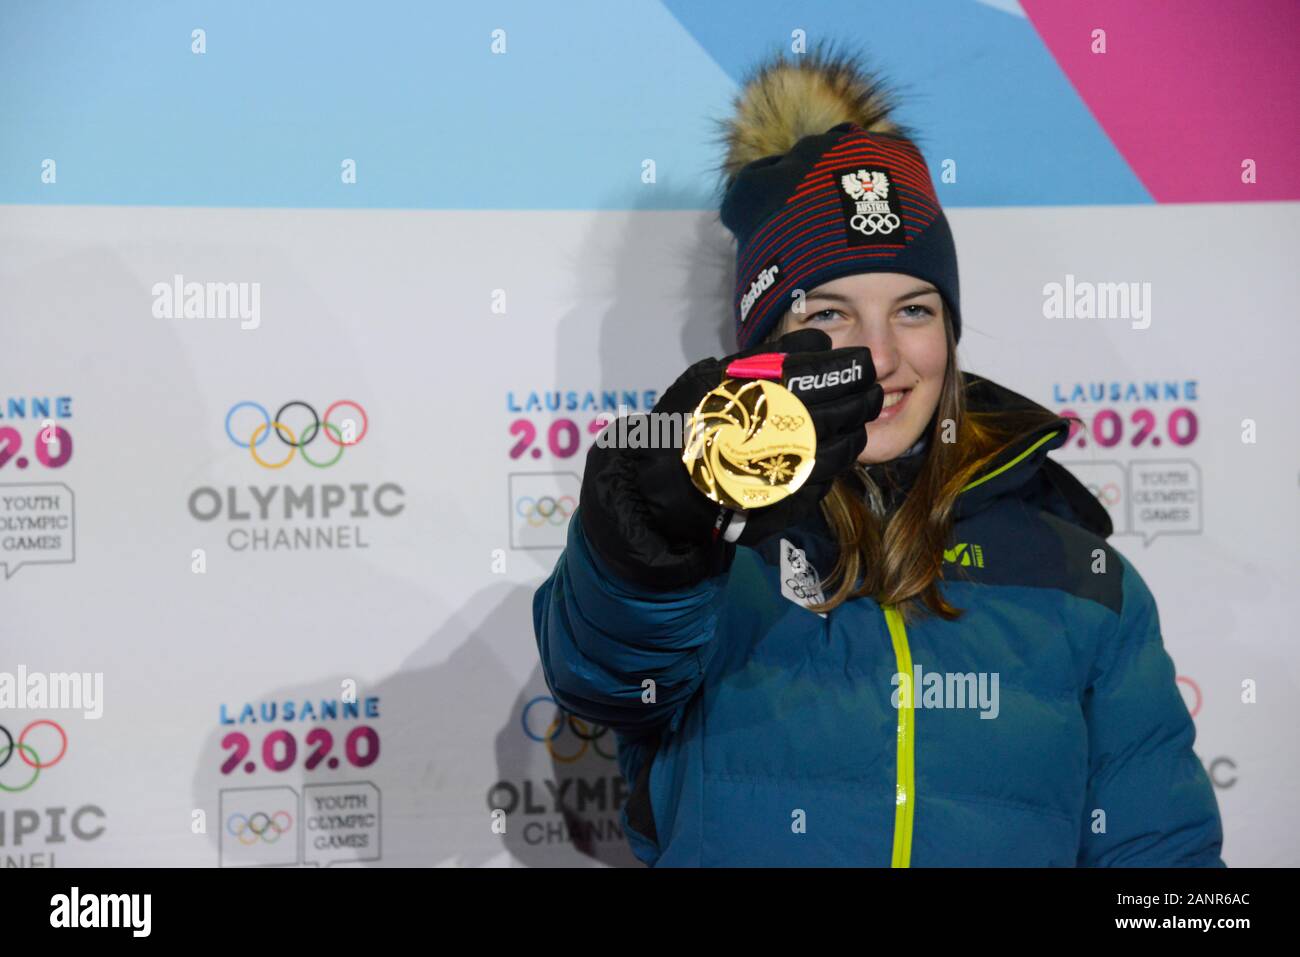 Lausanne, Switzerland. 18th Jan, 2020. Lisa Hirner of Austria with her gold  medal from the Women Individual NH/4kn Combined event in the 2020 Winter  Youth Olympic Games in Lausanne Switzerland. Credit: Christopher